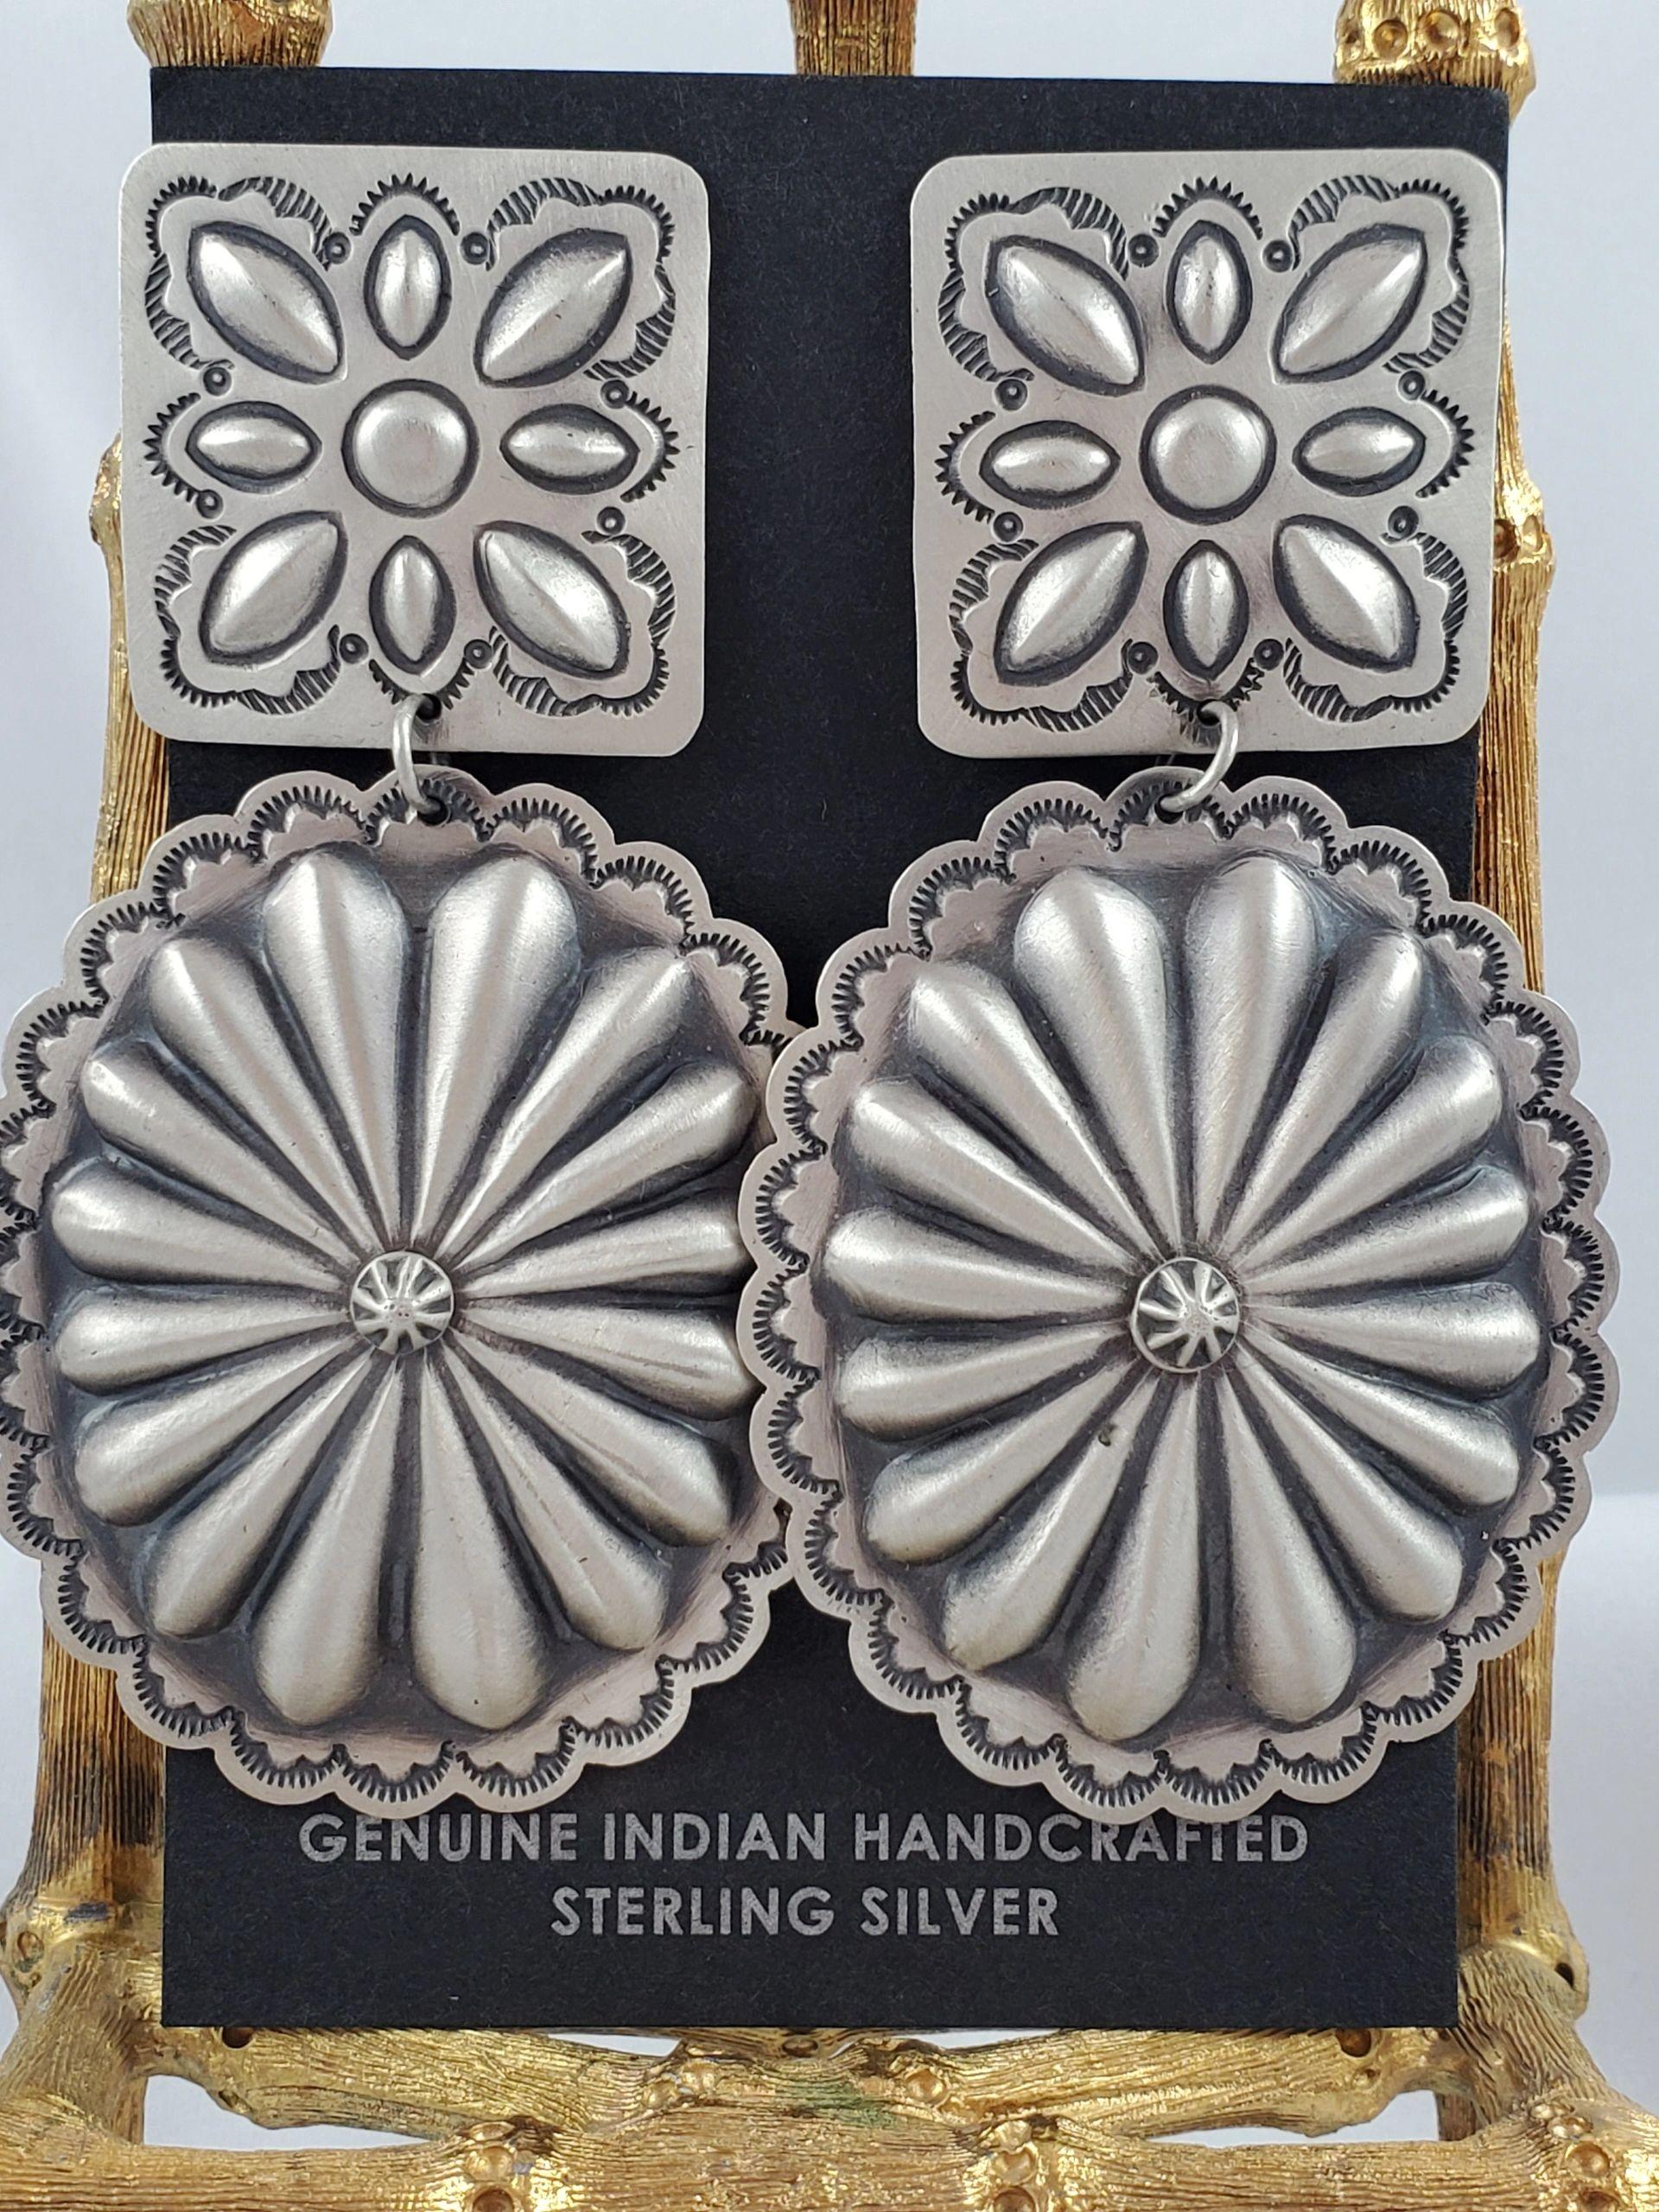 Navajo stamped concho earrings - Albuquerque Pawn Shop